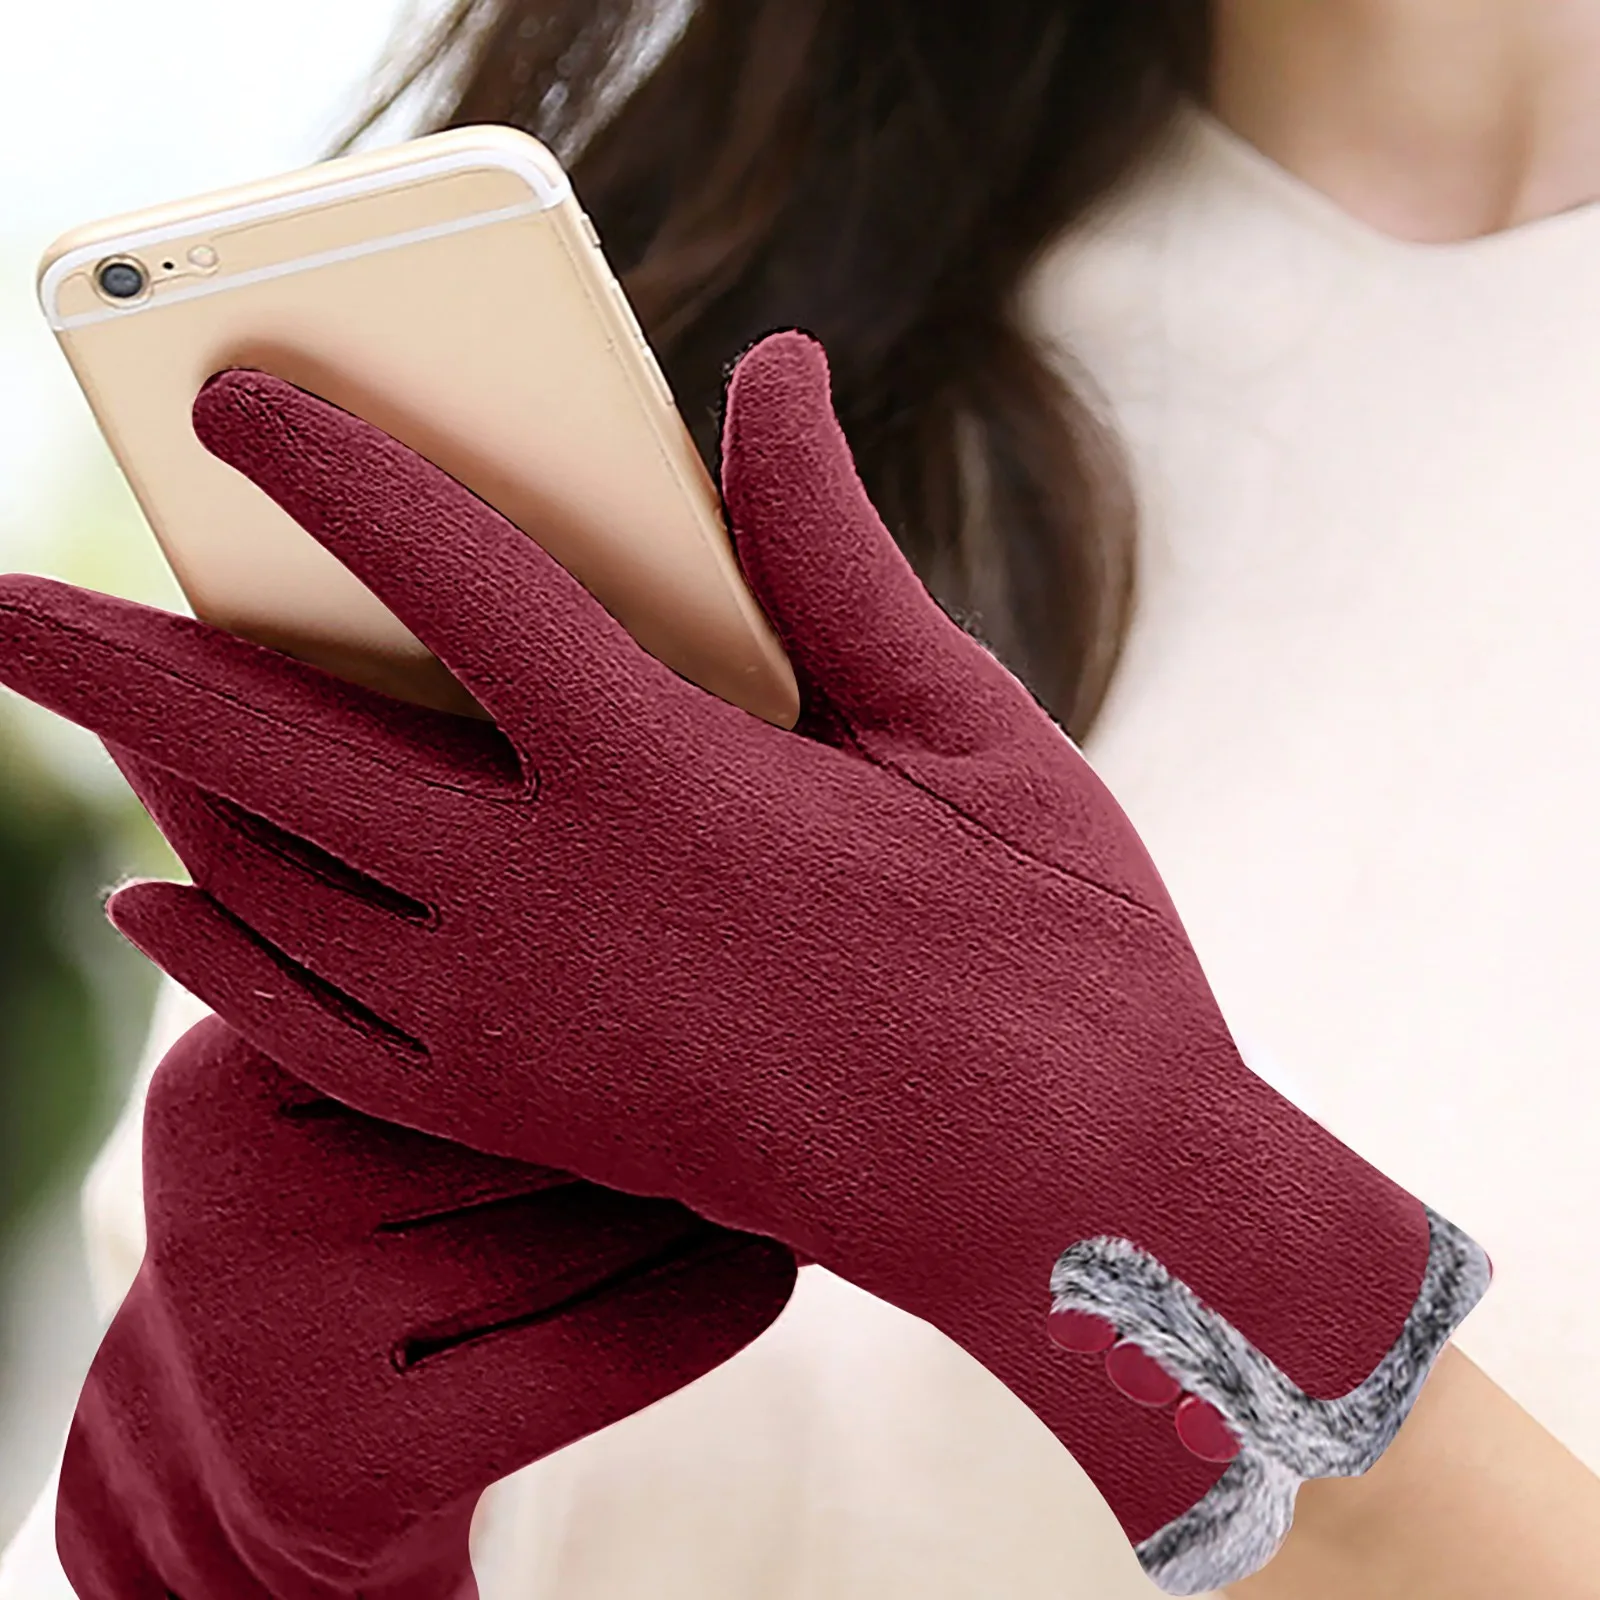 

1 Pairs Women's Winter Warm Screen Gloves Windproof Wool Fleece Lined Touchscreen Texting Mittens For Women and men cleaning